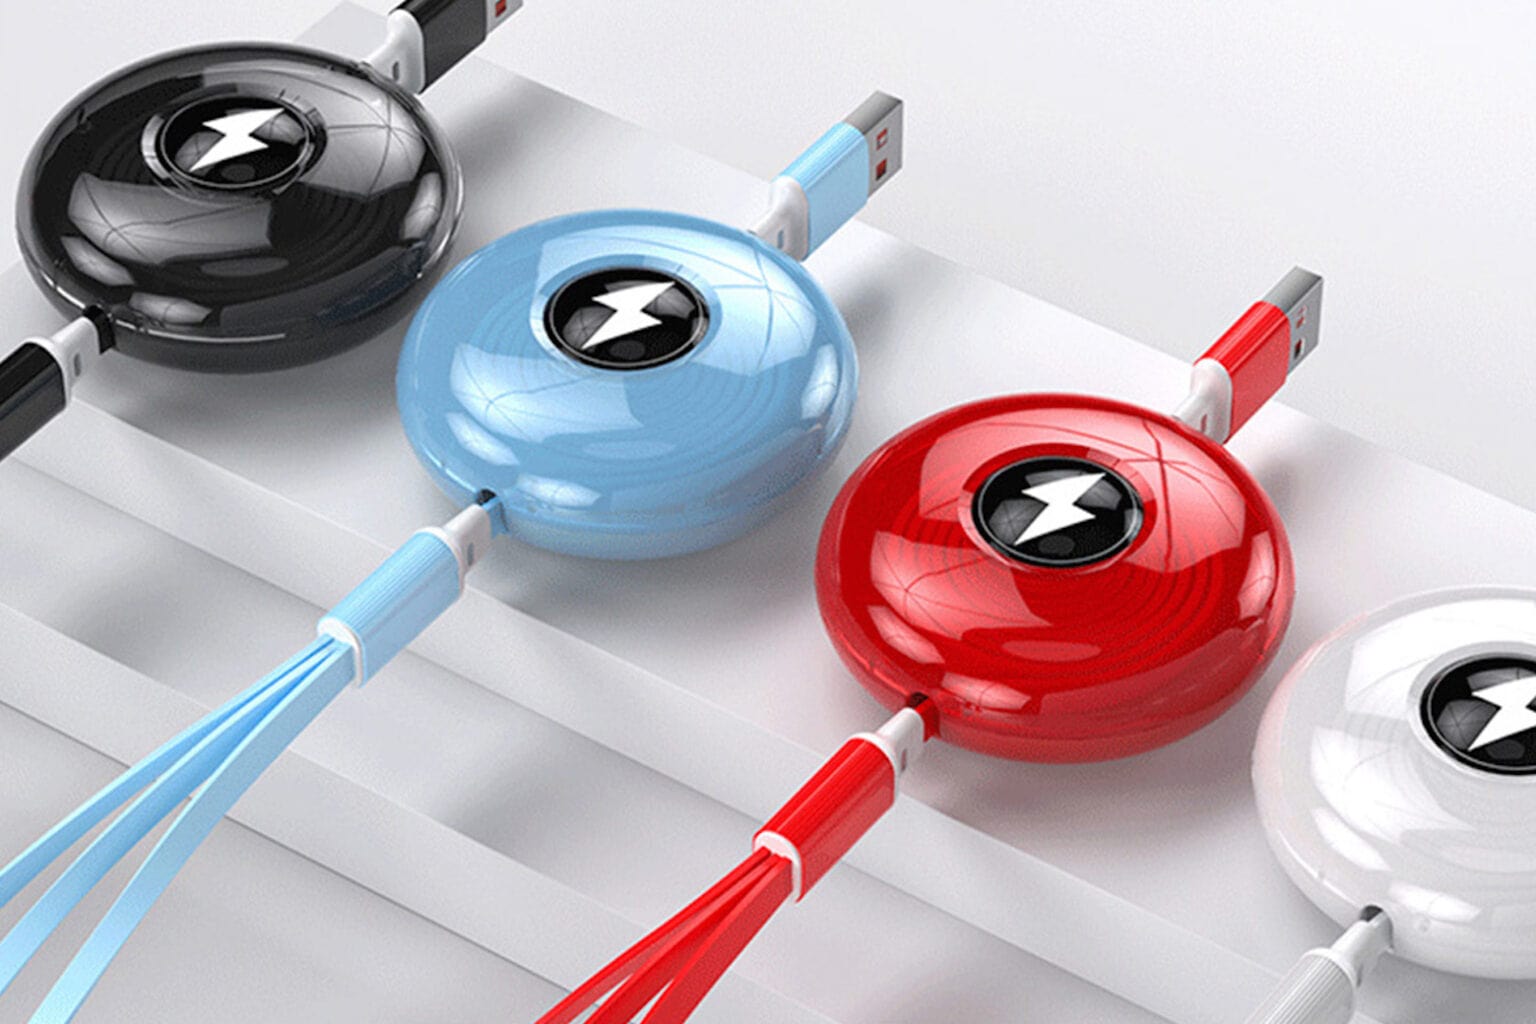 Cut down on cords with this 3-in-1 retractable charger, now only $18.